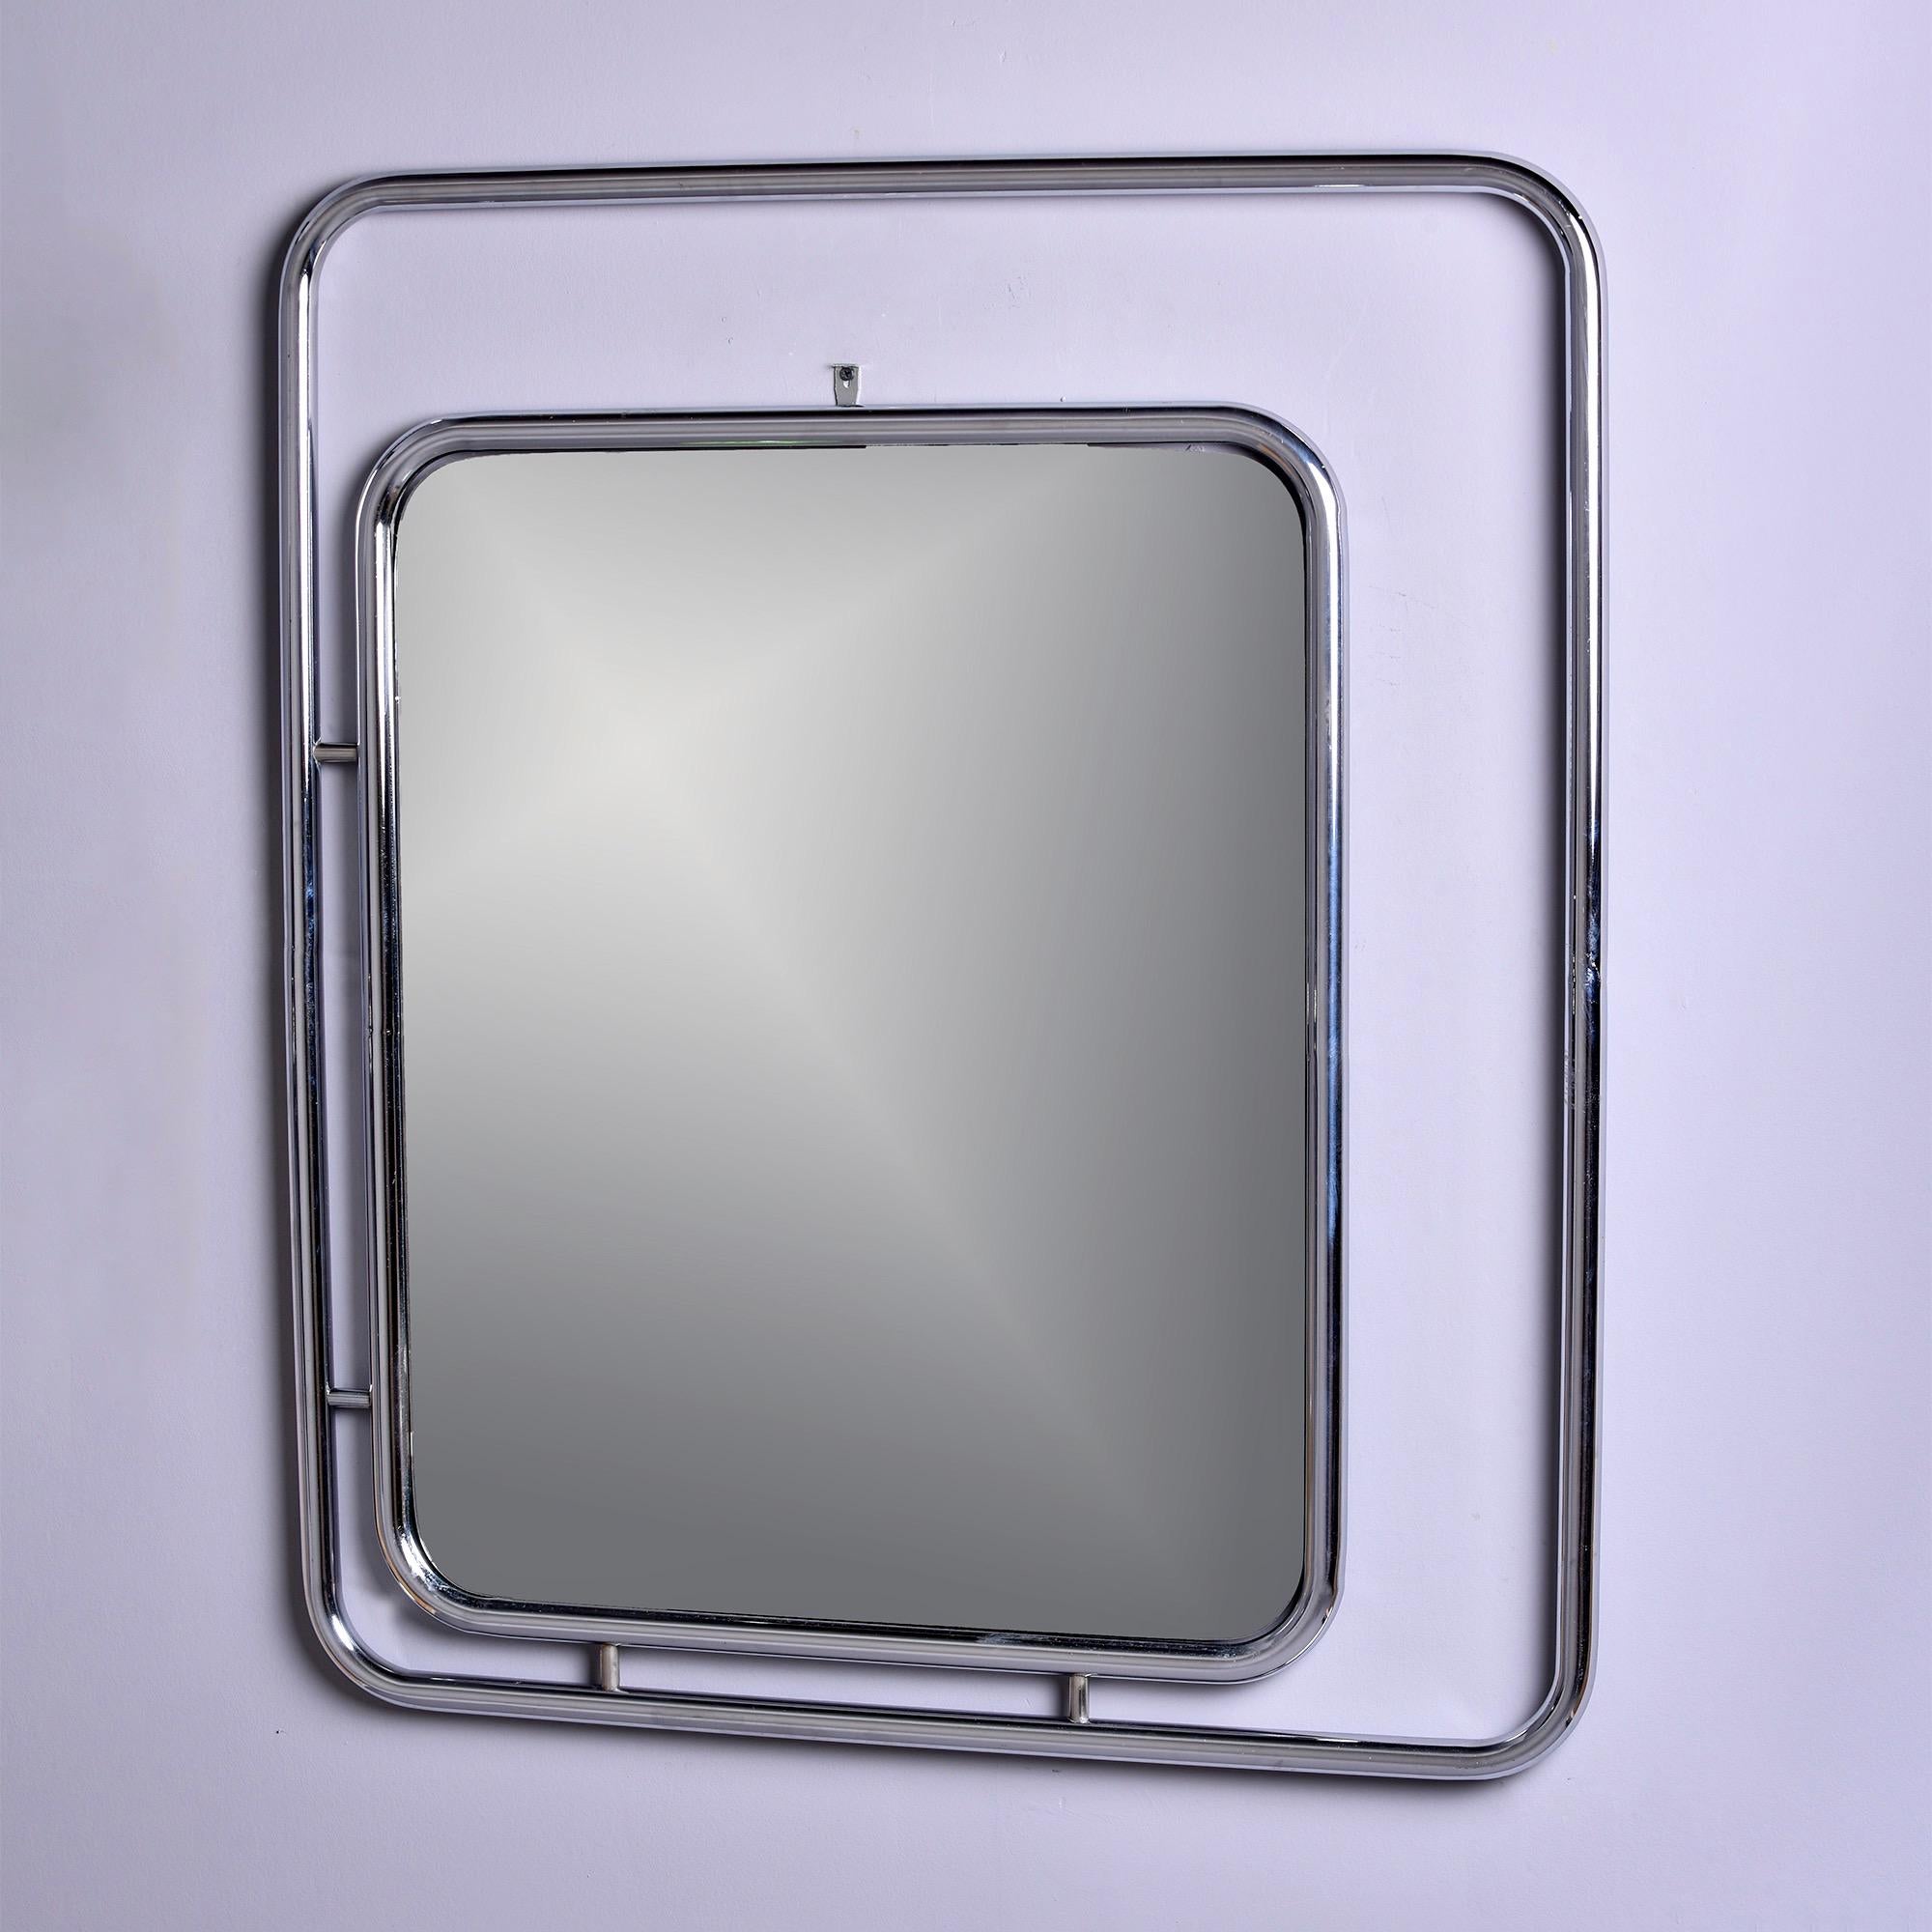 Circa 1970s mirror with chrome tubing frame within a frame. Found in Italy. Unknown maker. Very good vintage condition.

Actual Mirror Size: 28” H x 22.25” W.